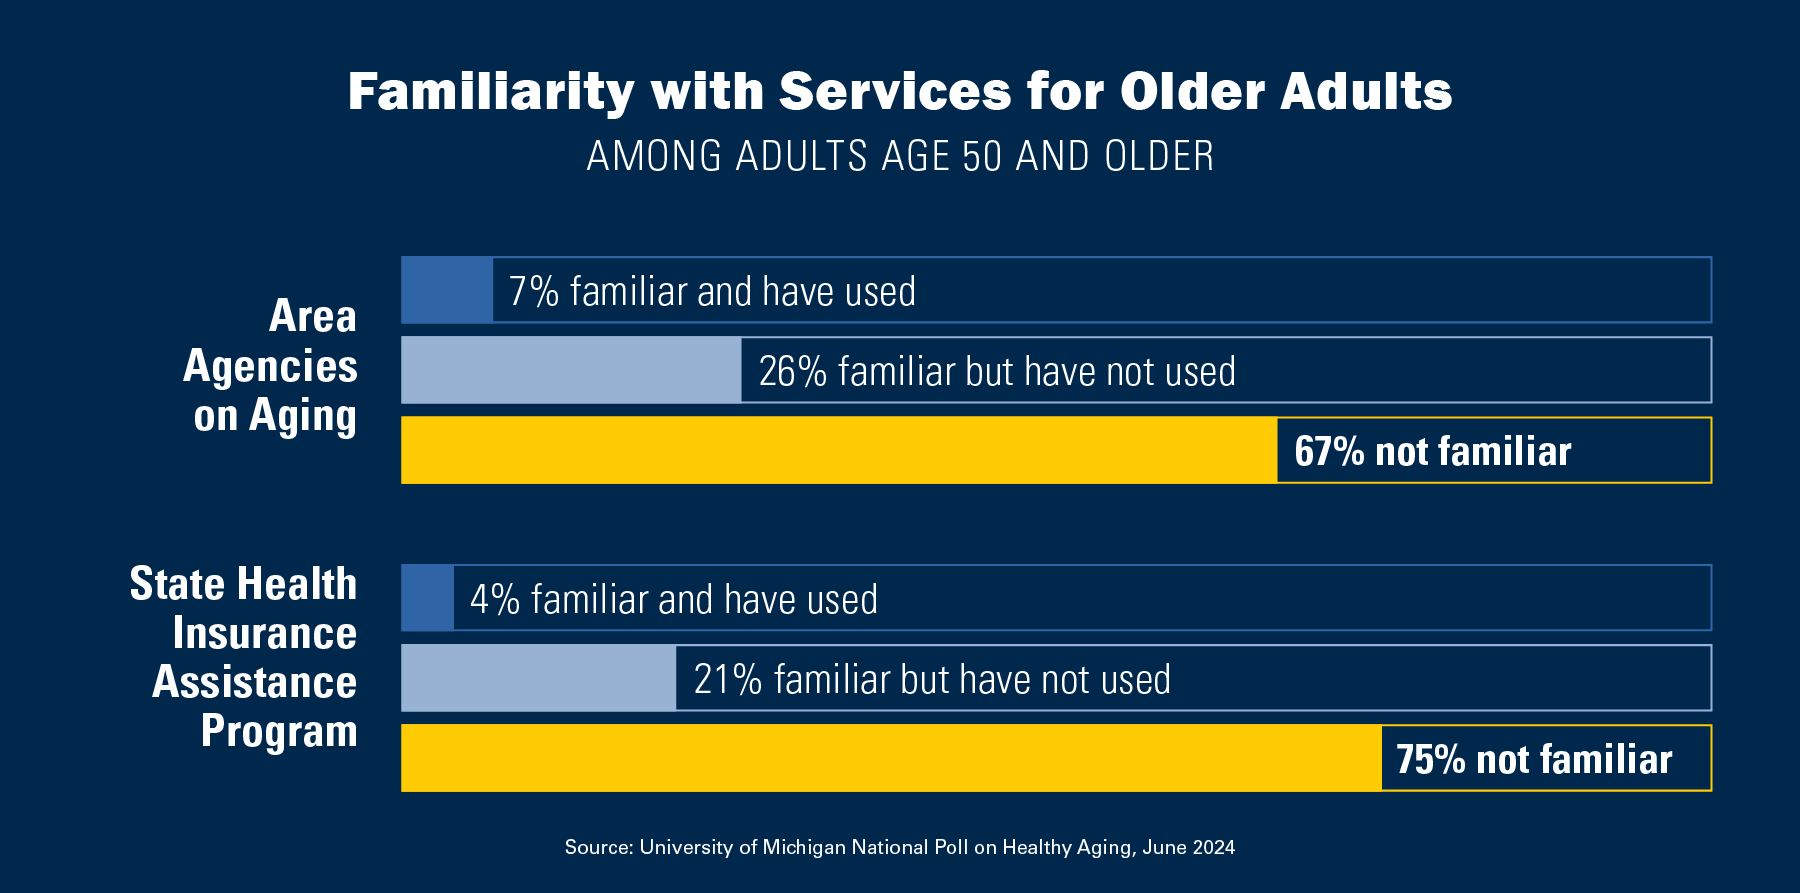 Familiarity with Services for Older Adults